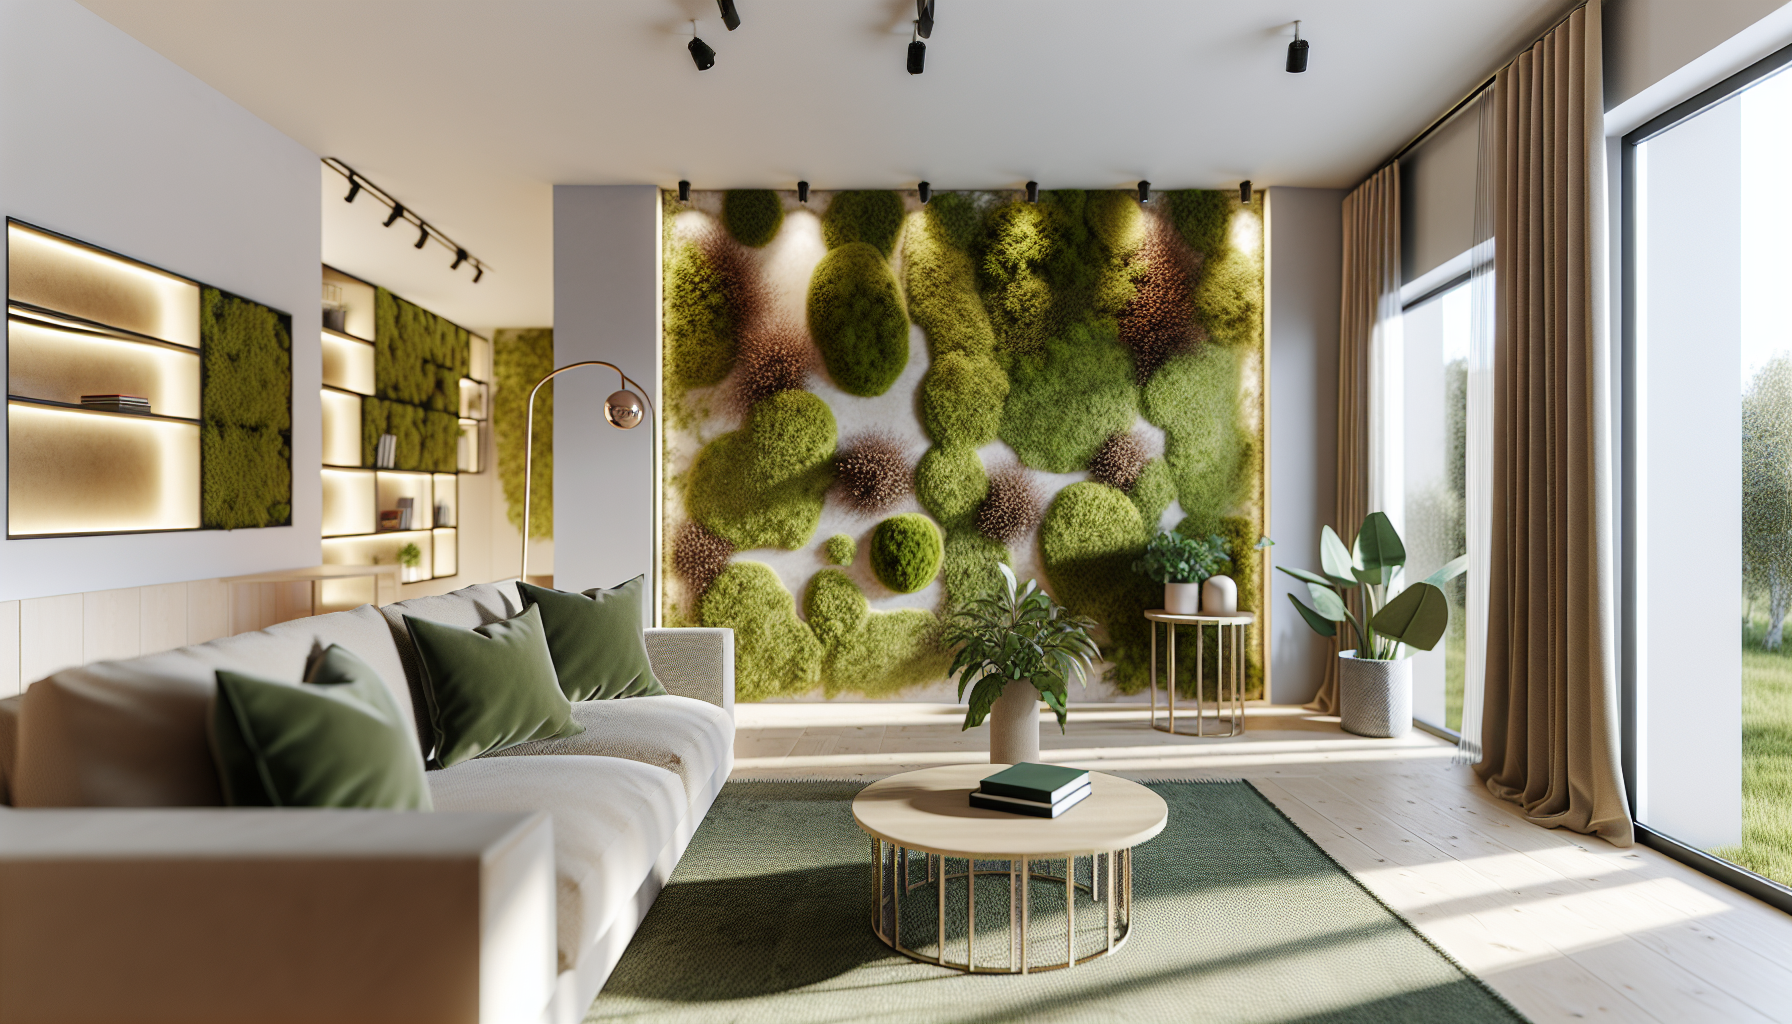 Residential setting adorned with beautiful moss wall art